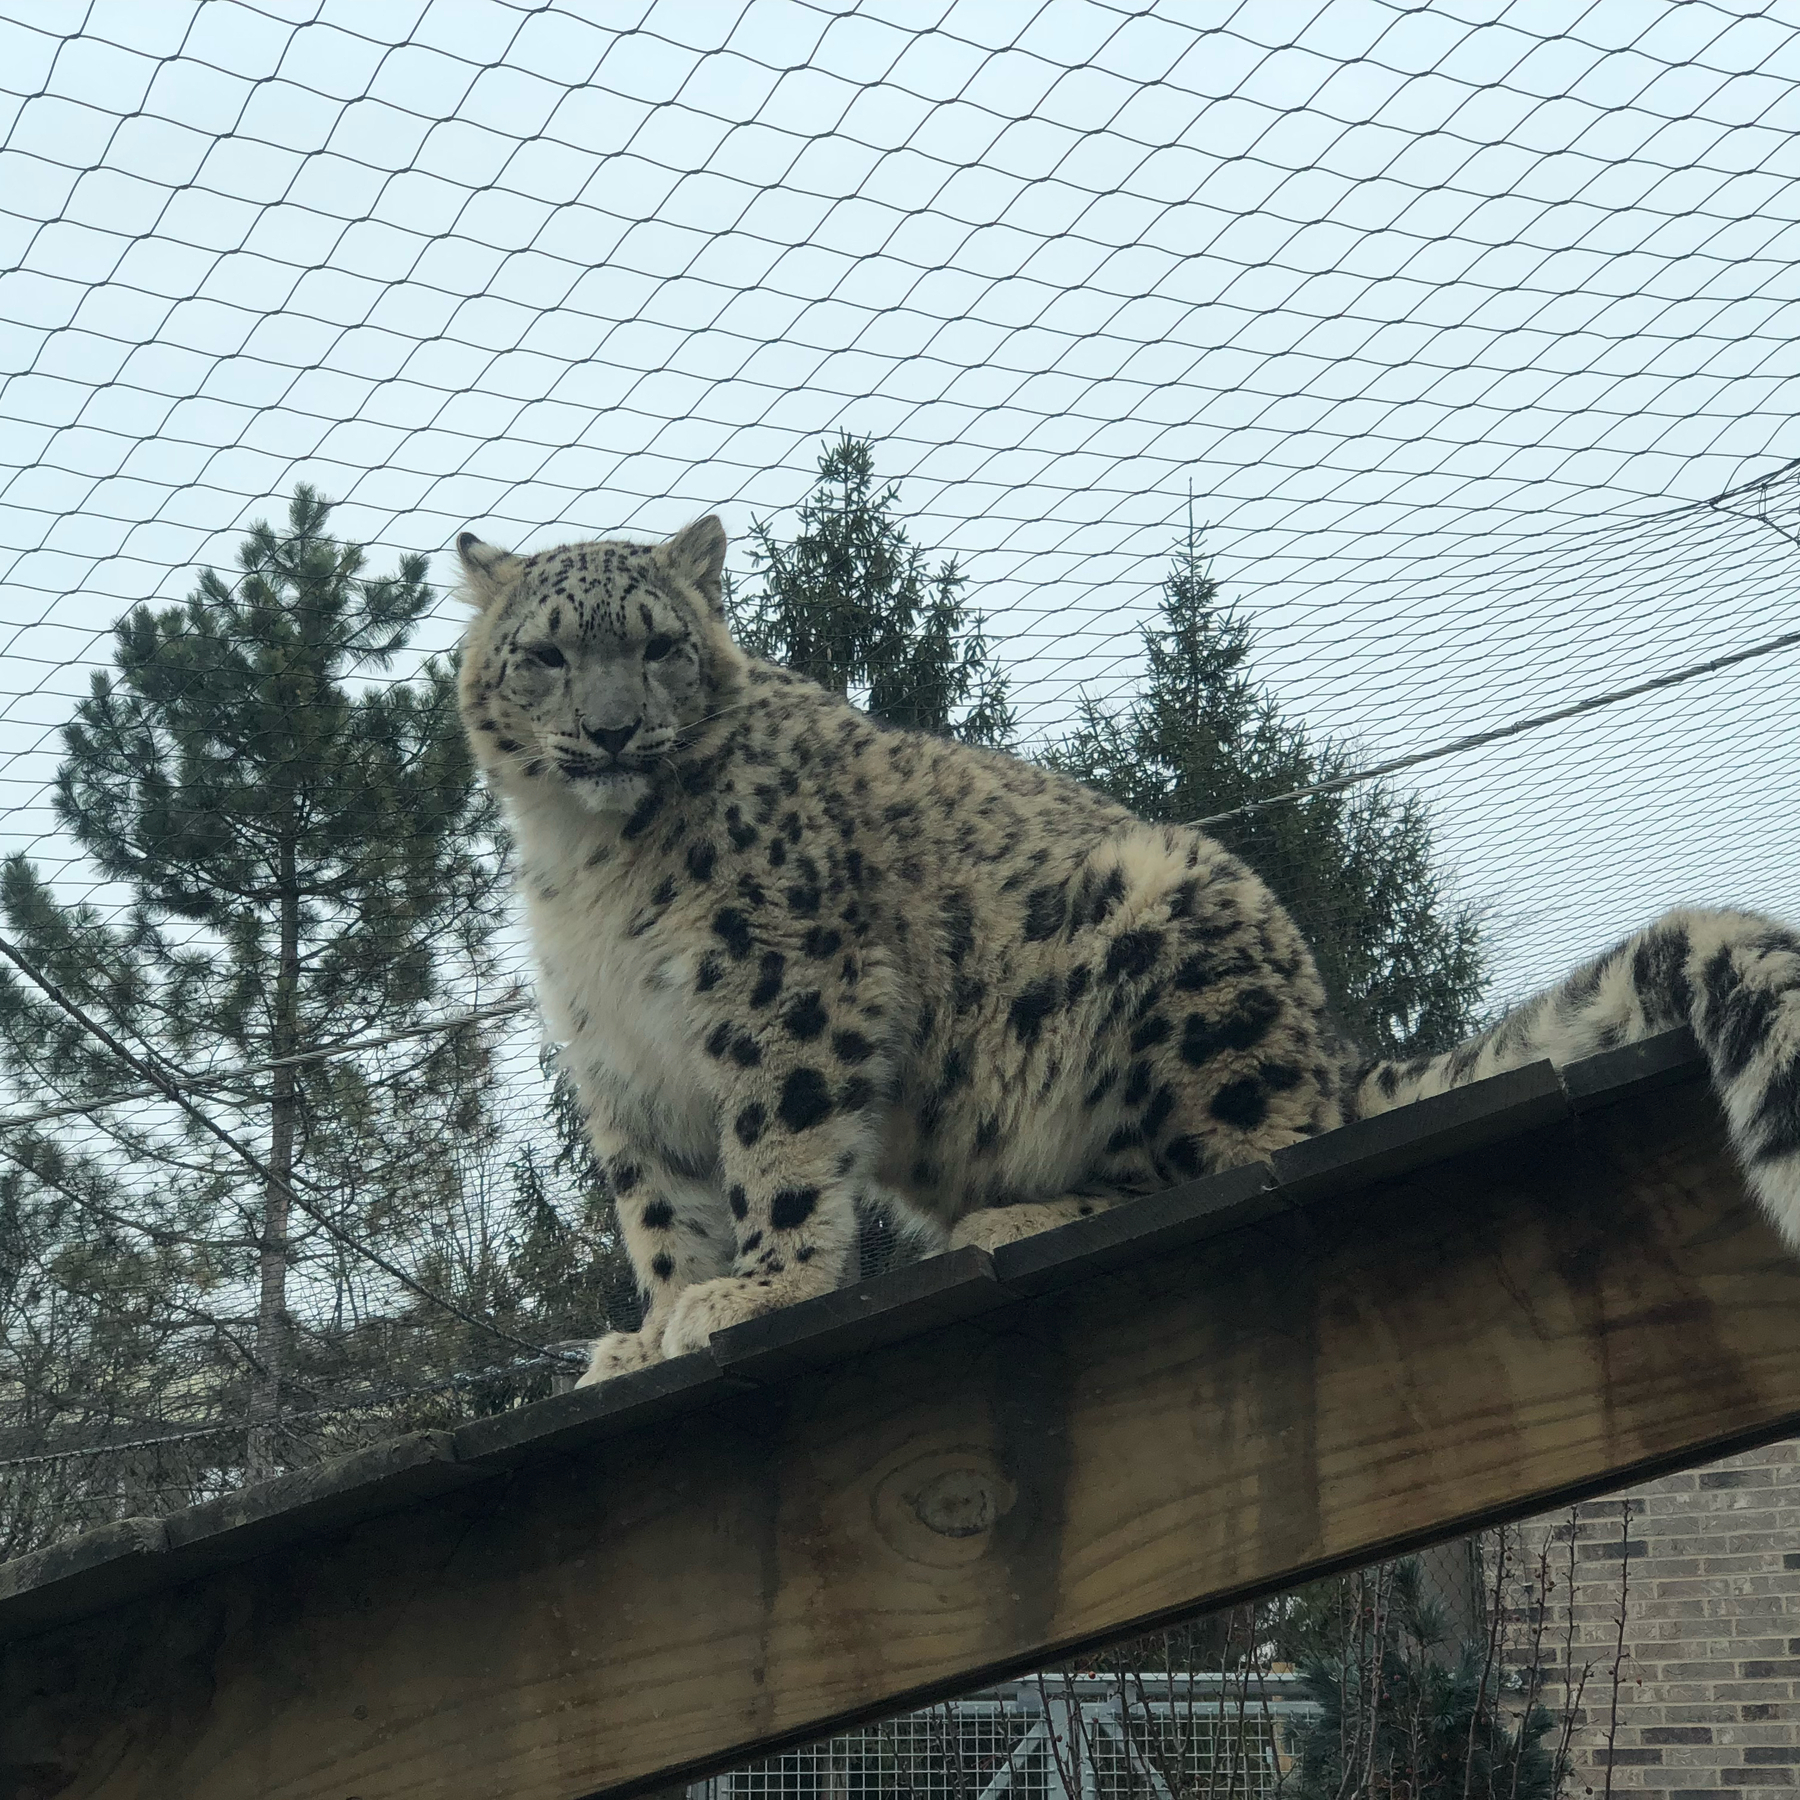 A snow leopard looking down at the viewer from atop a wooden beam.